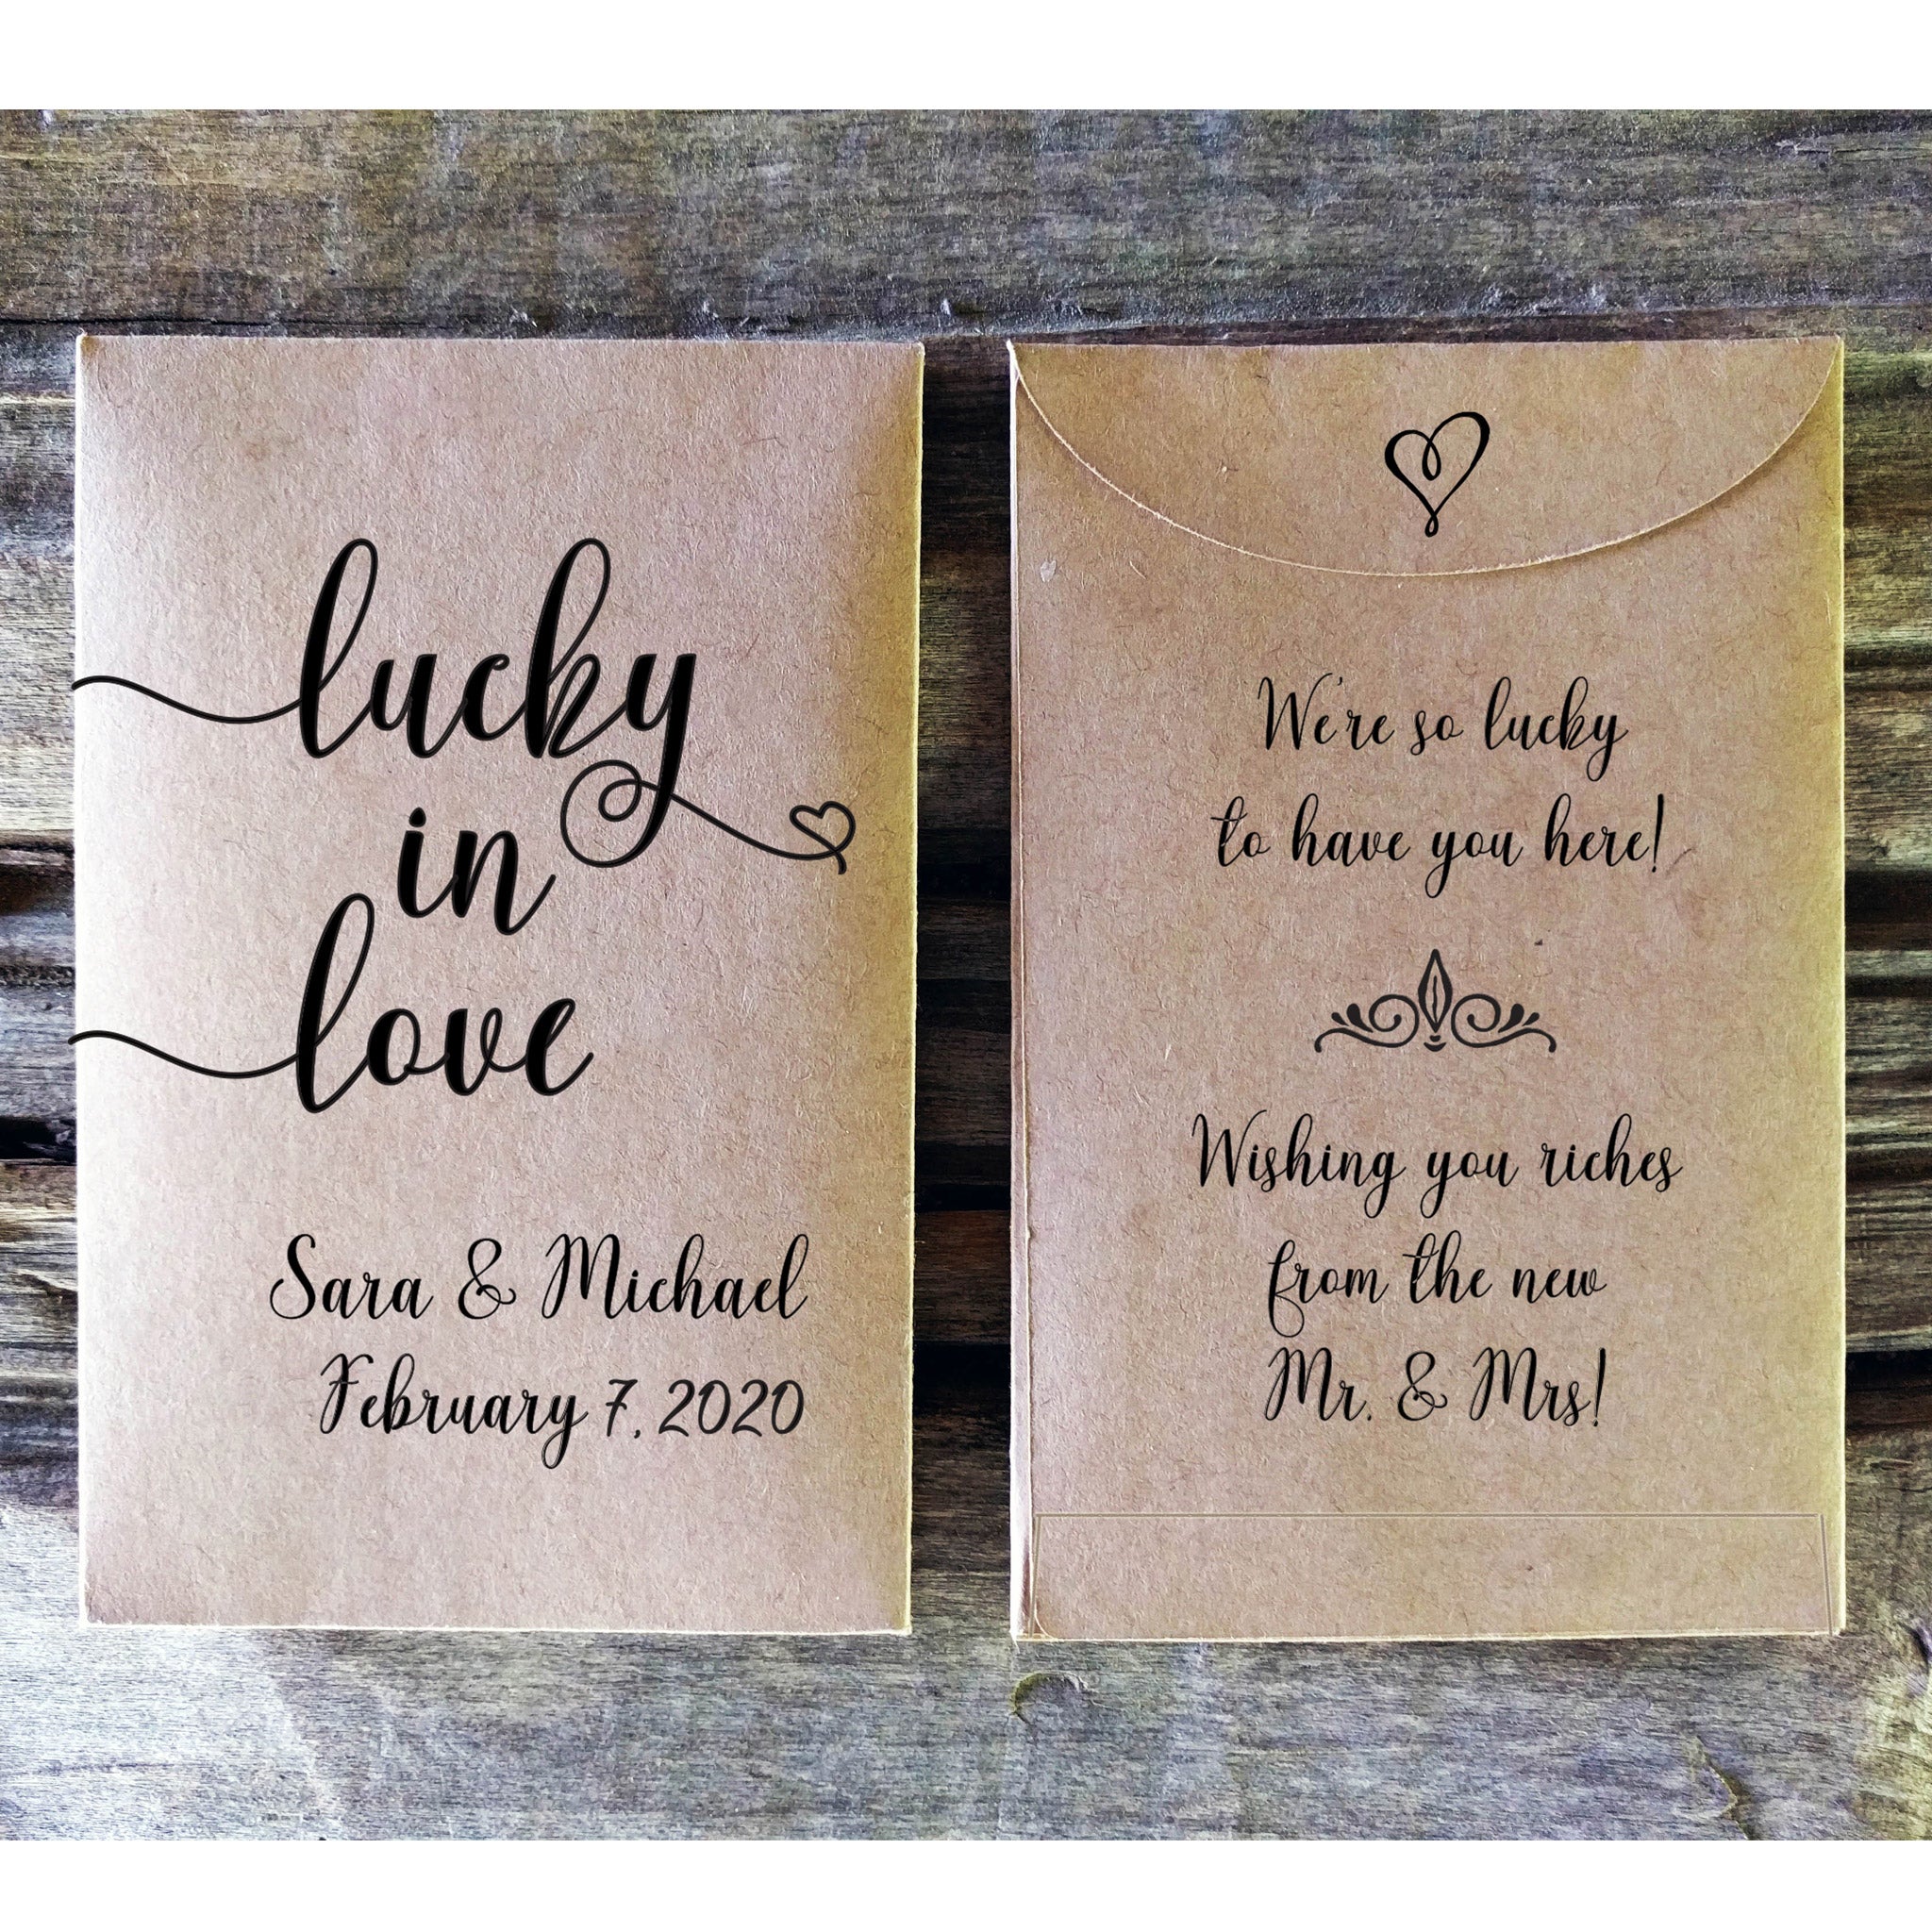 Lucky in Love Wedding Favor Lottery Ticket Envelope Favorfully